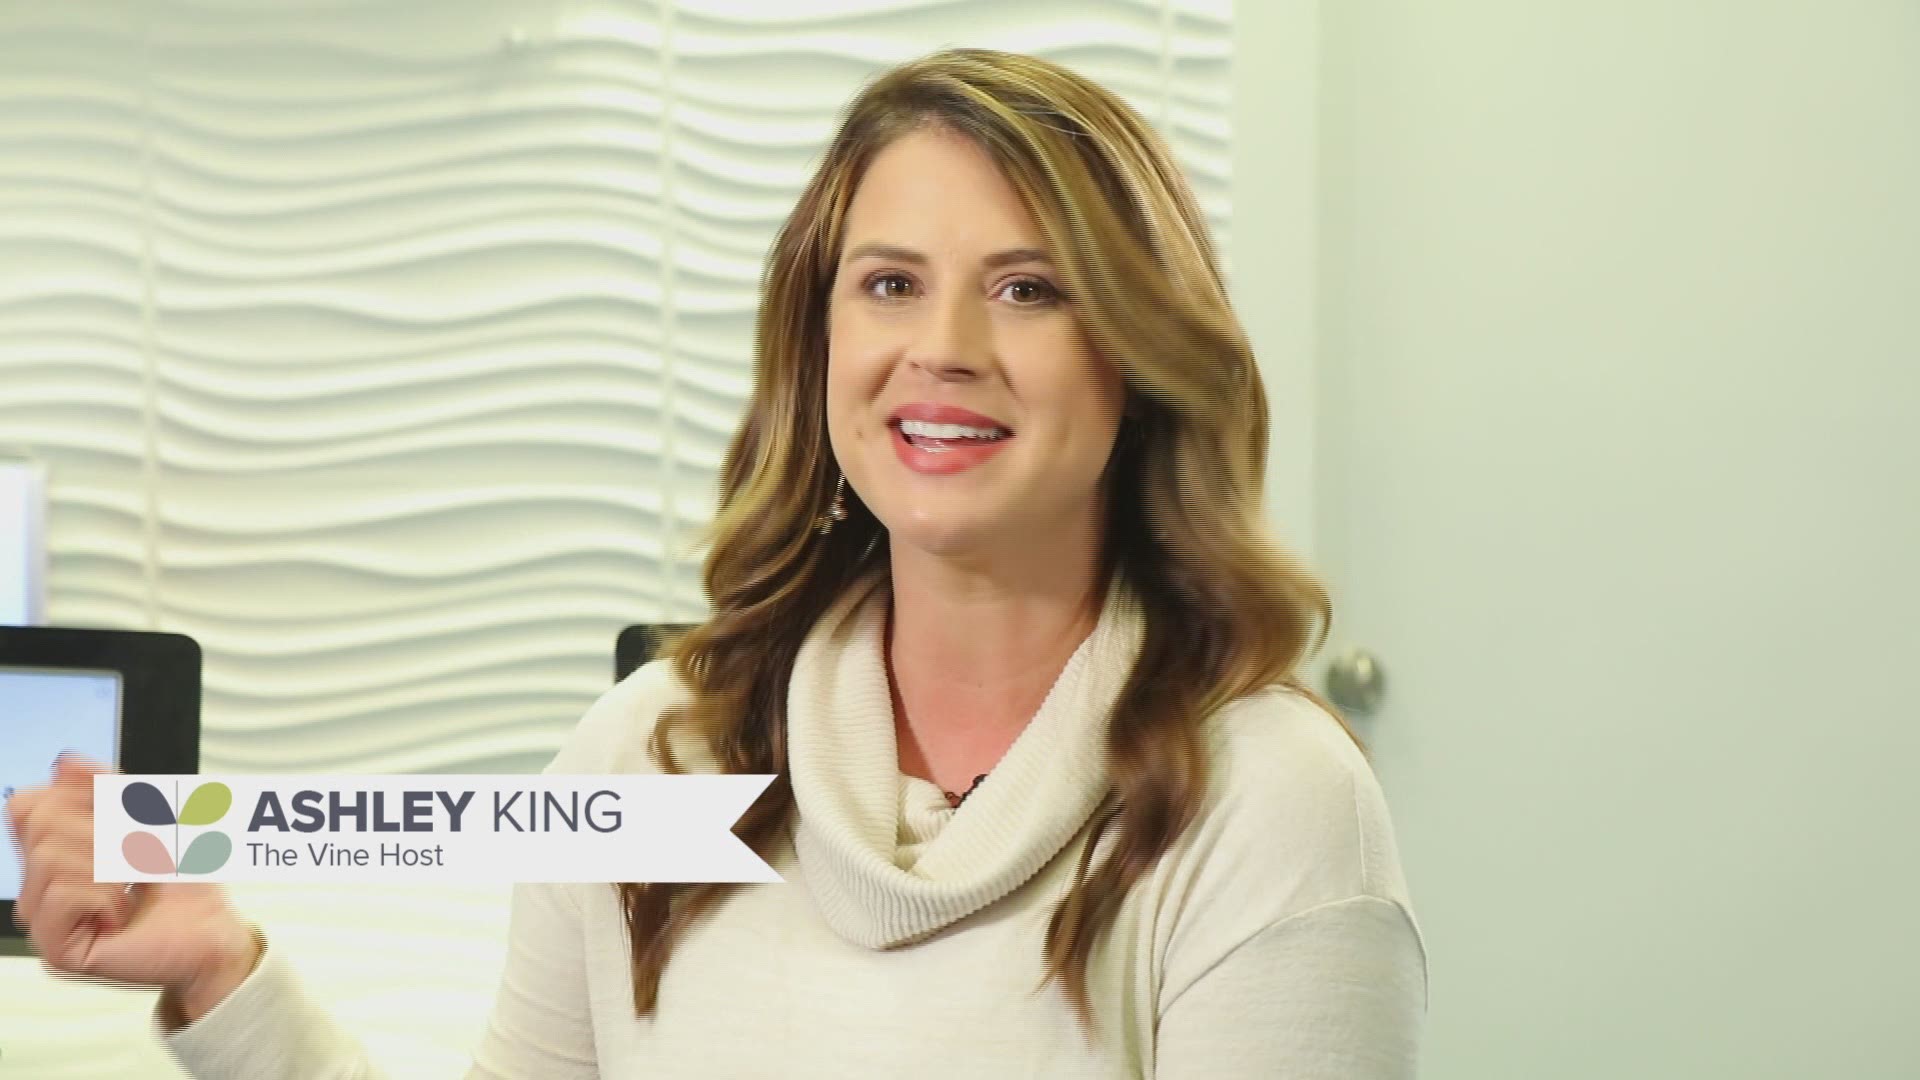 Ashley King sits down with representatives of FloatSpa to get the skinny on the central Arkansas business.